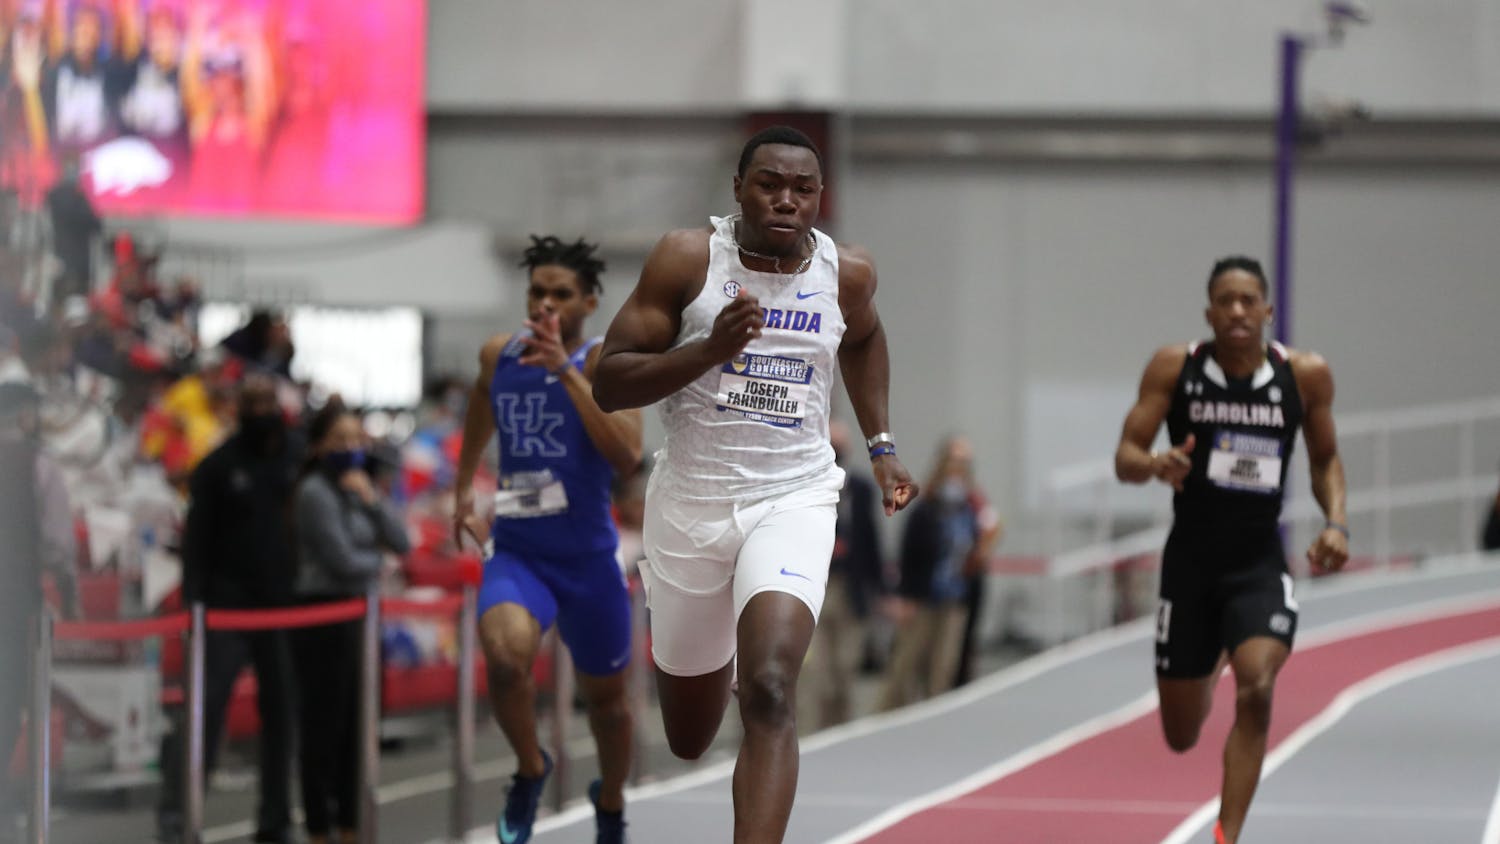 Florida's Joseph Fahnbulleh competes during the SEC Indoor Track and Field Championships on Saturday, February 27, 2021 at Randal Tyson Track Center in Fayetteville, Ark. / UAA Communications photo by Alex de la Osa